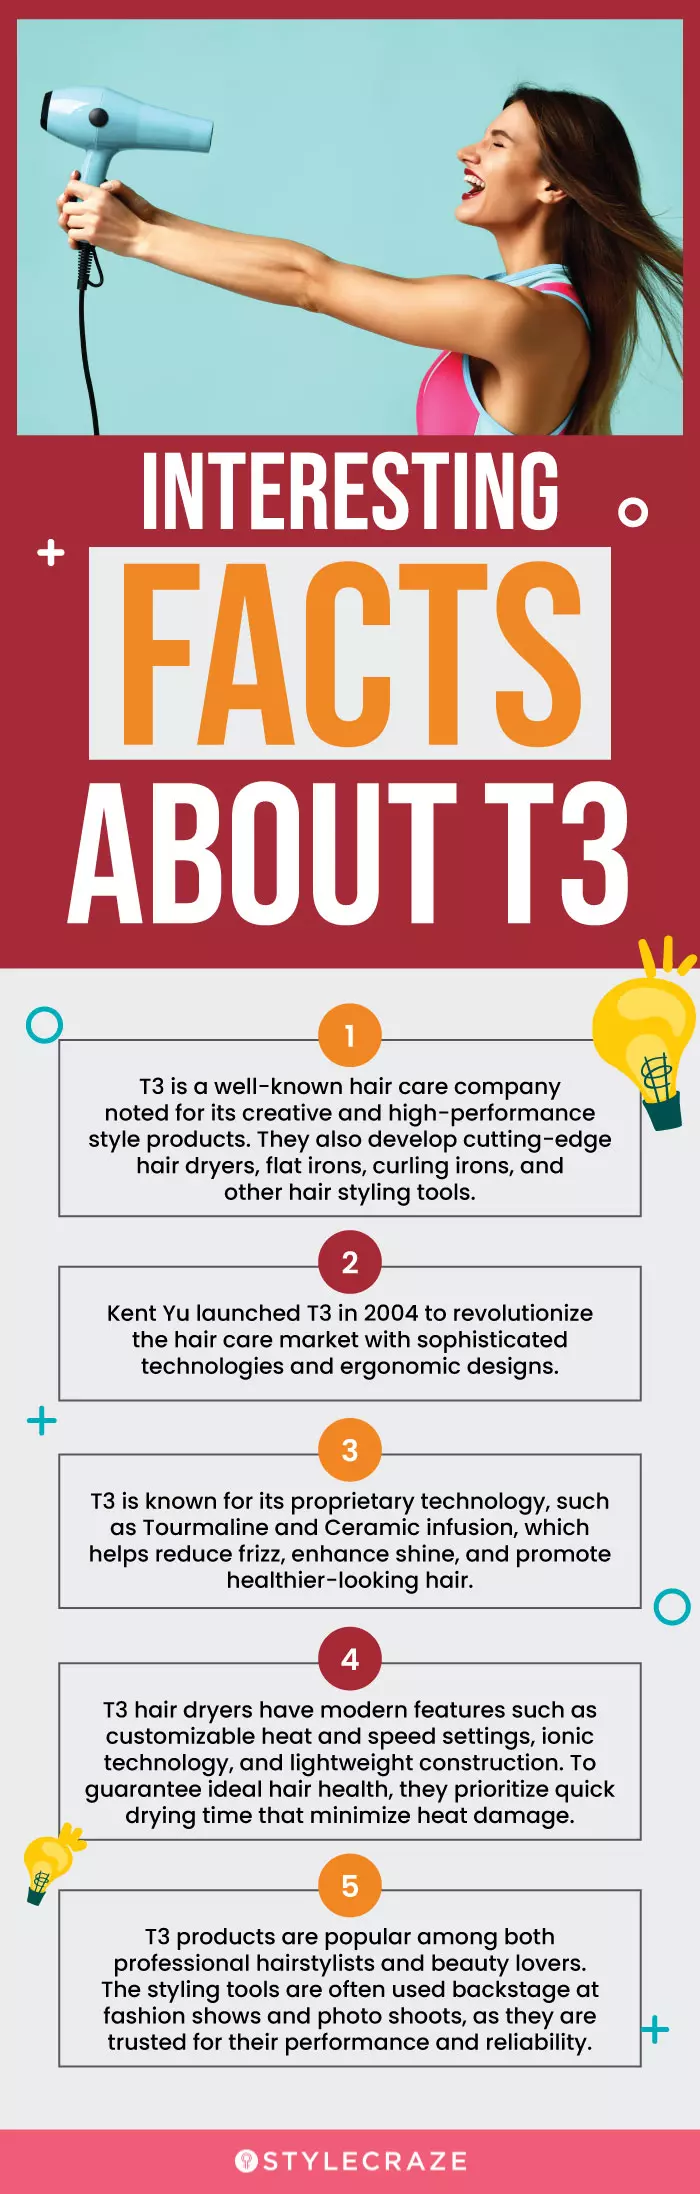 Interesting Facts About T3 (infographic)